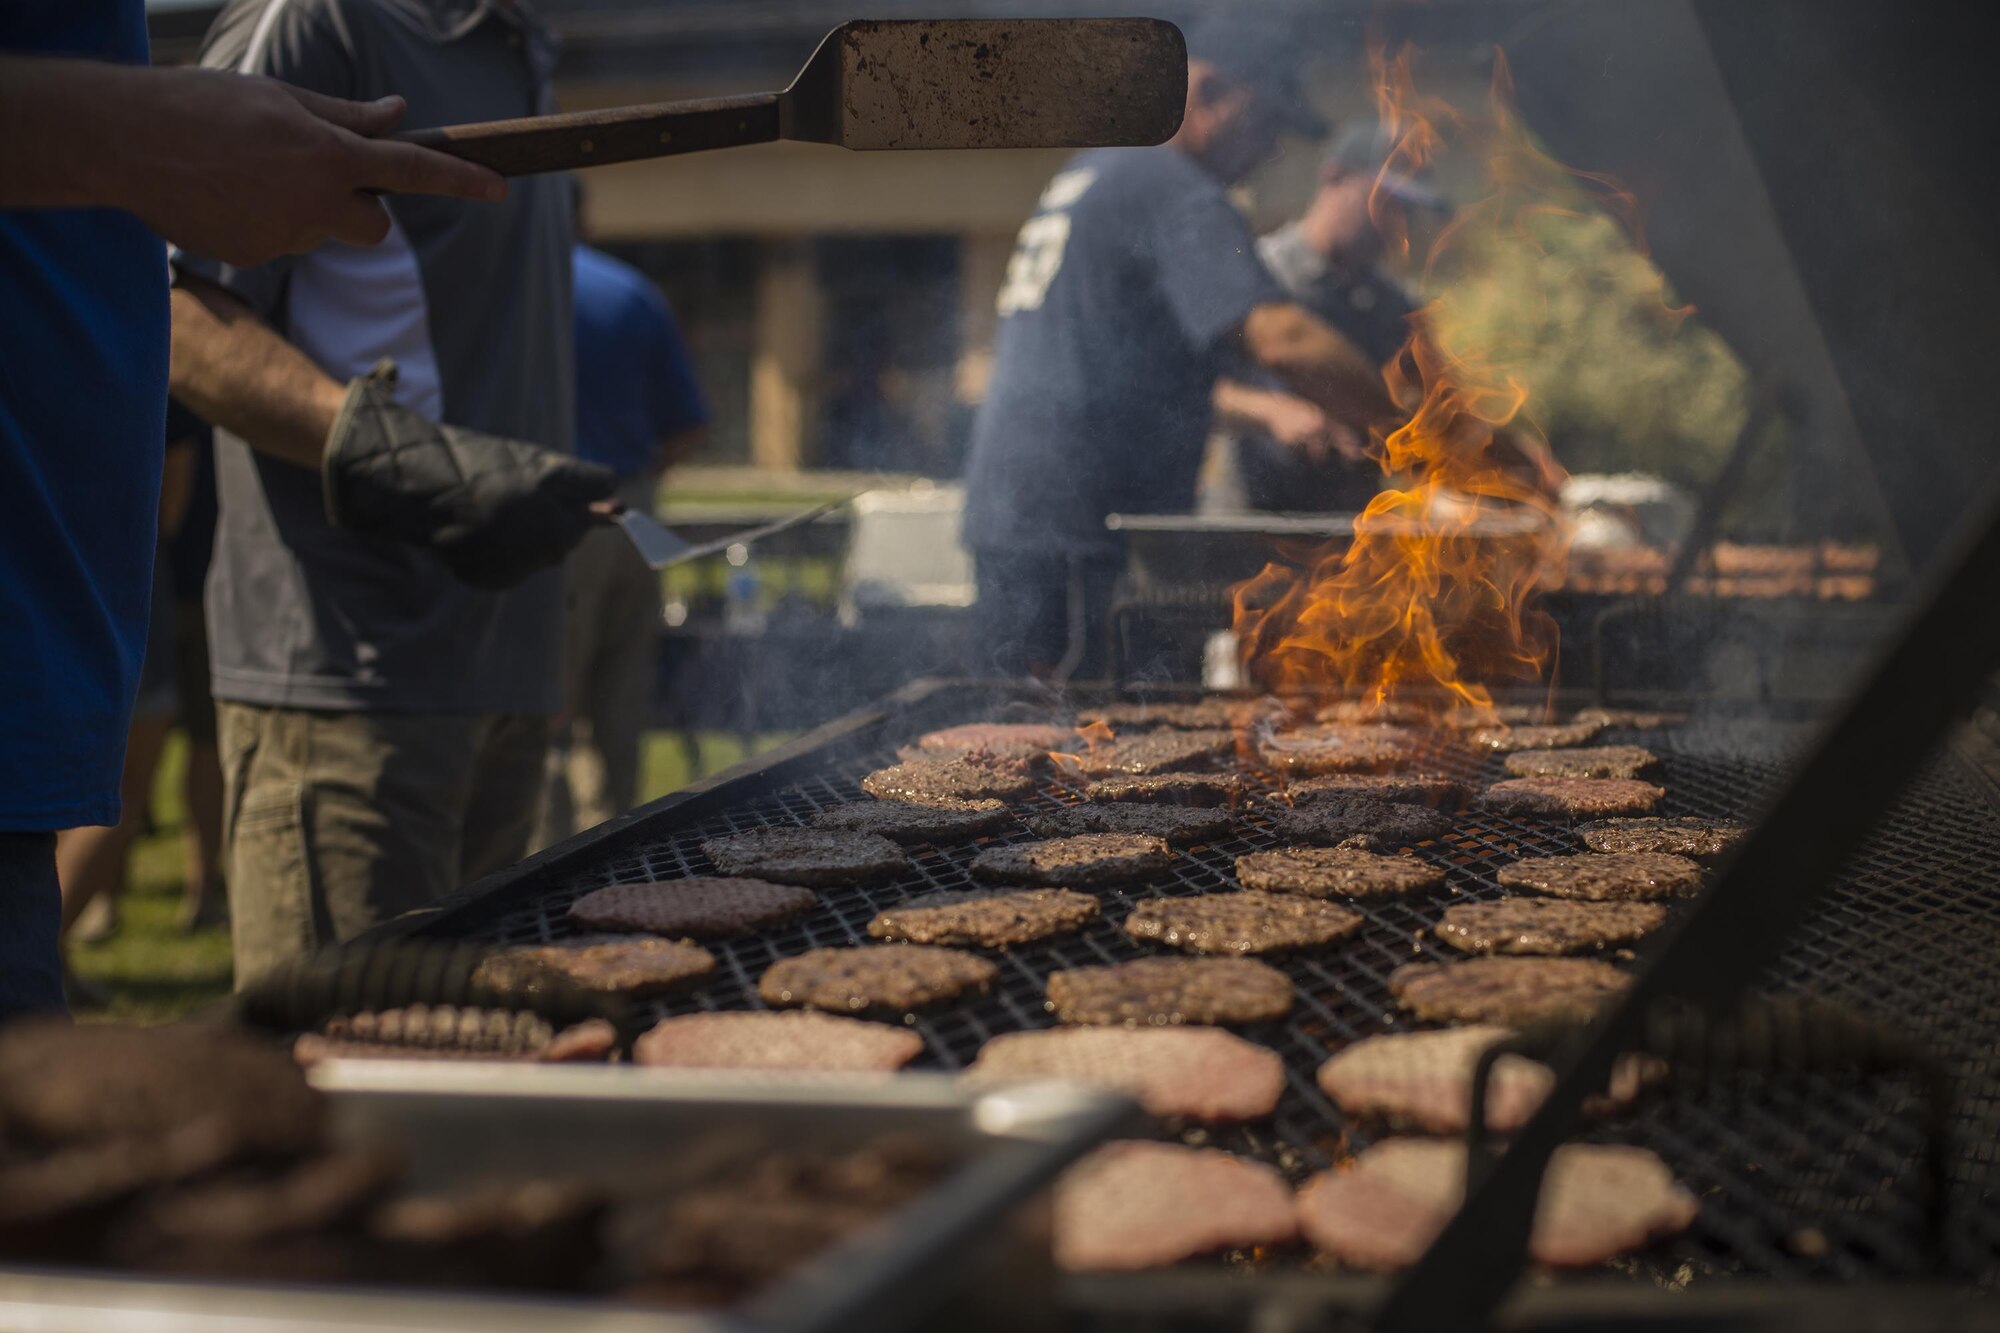 Moody’s Chief’s group prepares lunch during Comprehensive Airmen Fitness day, April 29, 2016, at Moody Air Force Base, Ga. This CAF day focused on the social pillar by giving Airmen an opportunity to socialize and make new friends. (U.S. Air Force photo by Airman Daniel Snider/Released)
